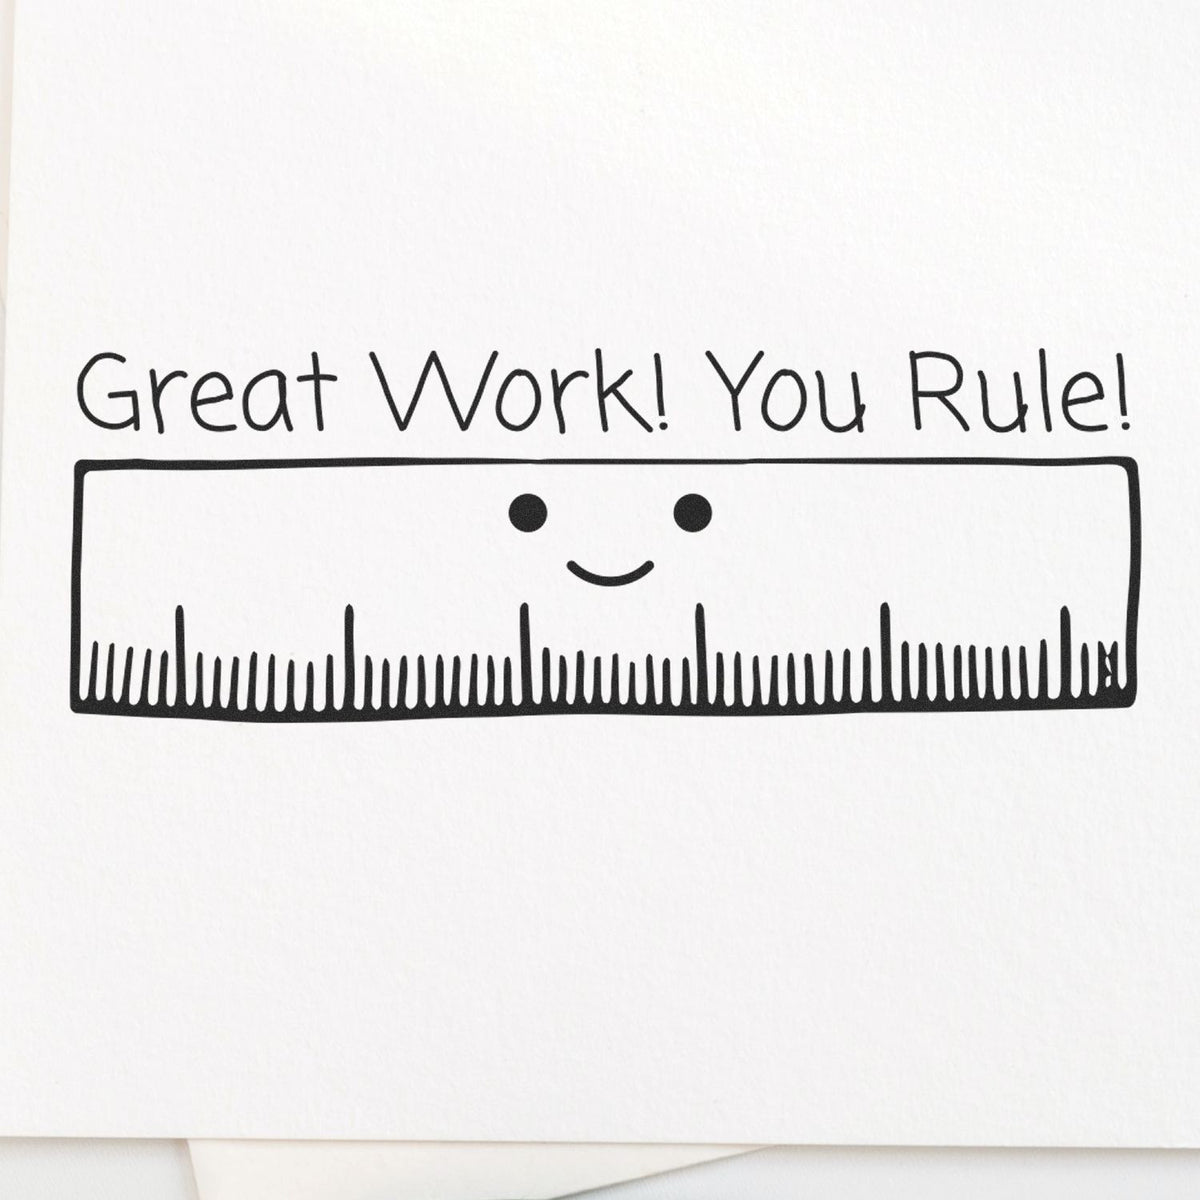 Great Work You Rule Rubber Stamp Lifestyle Photo